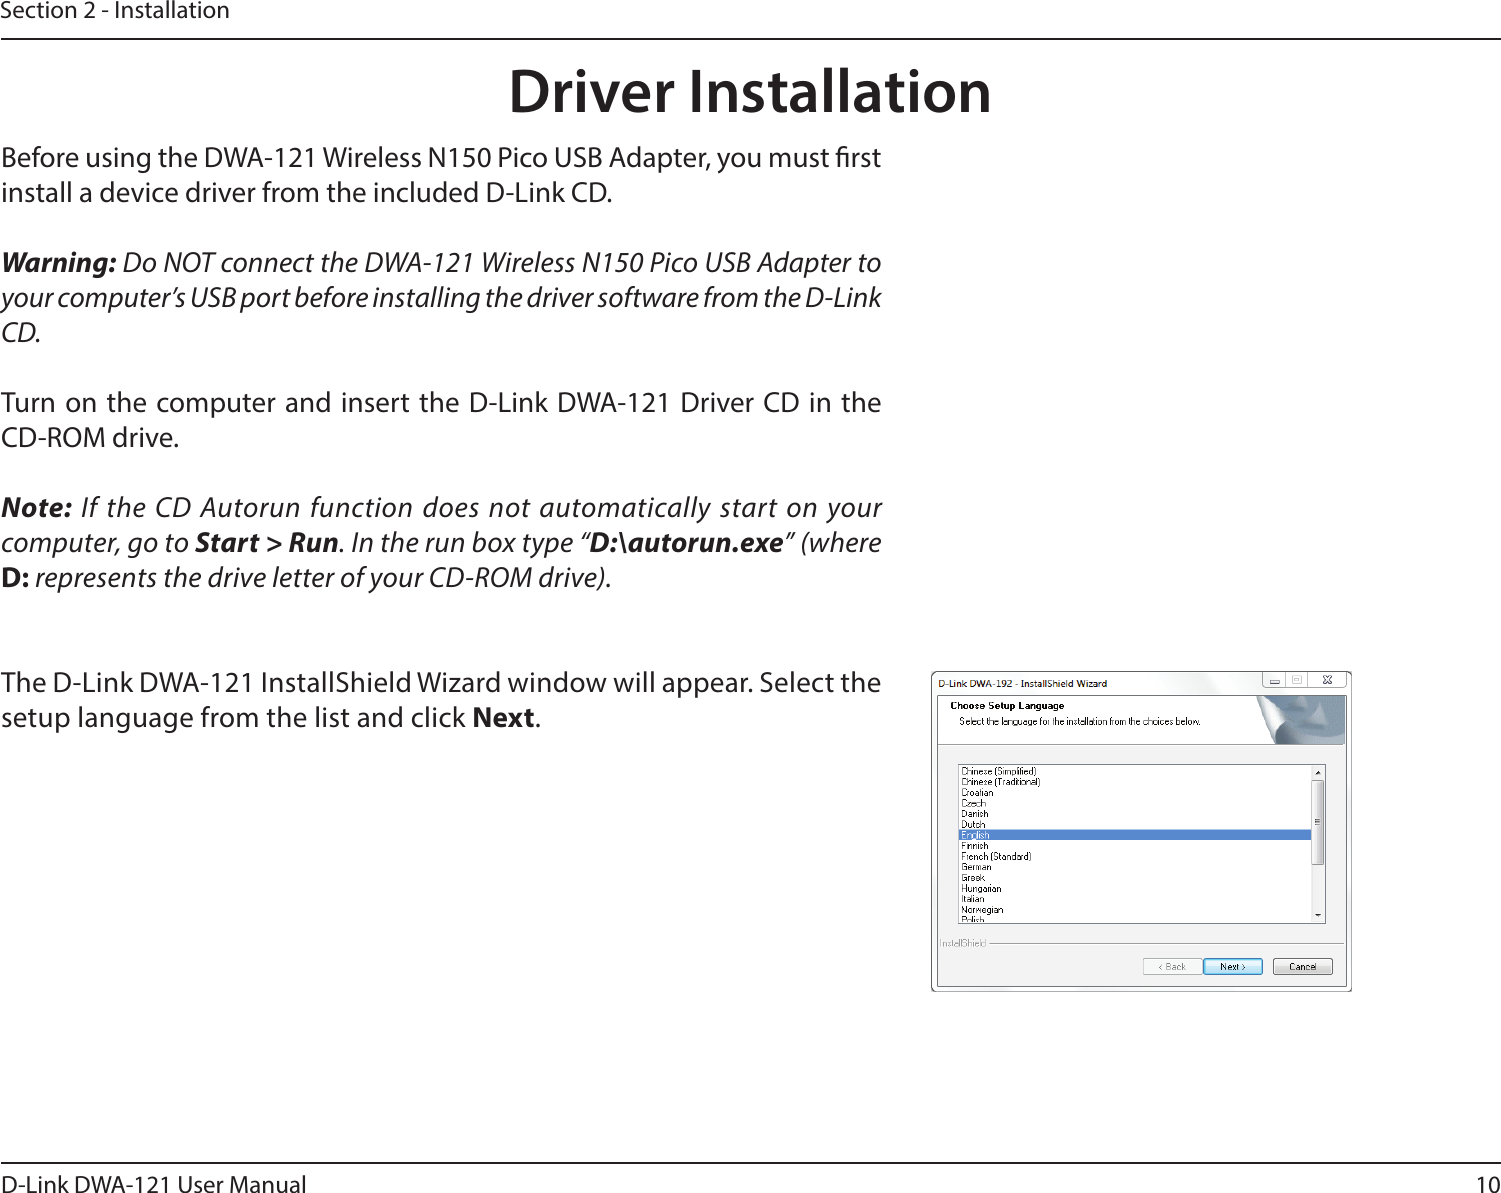 10D-Link DWA-121 User ManualSection 2 - InstallationDriver InstallationBefore using the DWA-121 Wireless N150 Pico USB Adapter, you must rst install a device driver from the included D-Link CD.Warning: Do NOT connect the DWA-121 Wireless N150 Pico USB Adapter to your computer’s USB port before installing the driver software from the D-Link CD.Turn on the computer and insert the D-Link DWA-121 Driver CD in the CD-ROM drive.Note: If the CD Autorun function does not automatically start on your computer, go to Start &gt; Run. In the run box type “D:\autorun.exe” (where D: represents the drive letter of your CD-ROM drive).The D-Link DWA-121 InstallShield Wizard window will appear. Select the setup language from the list and click Next.